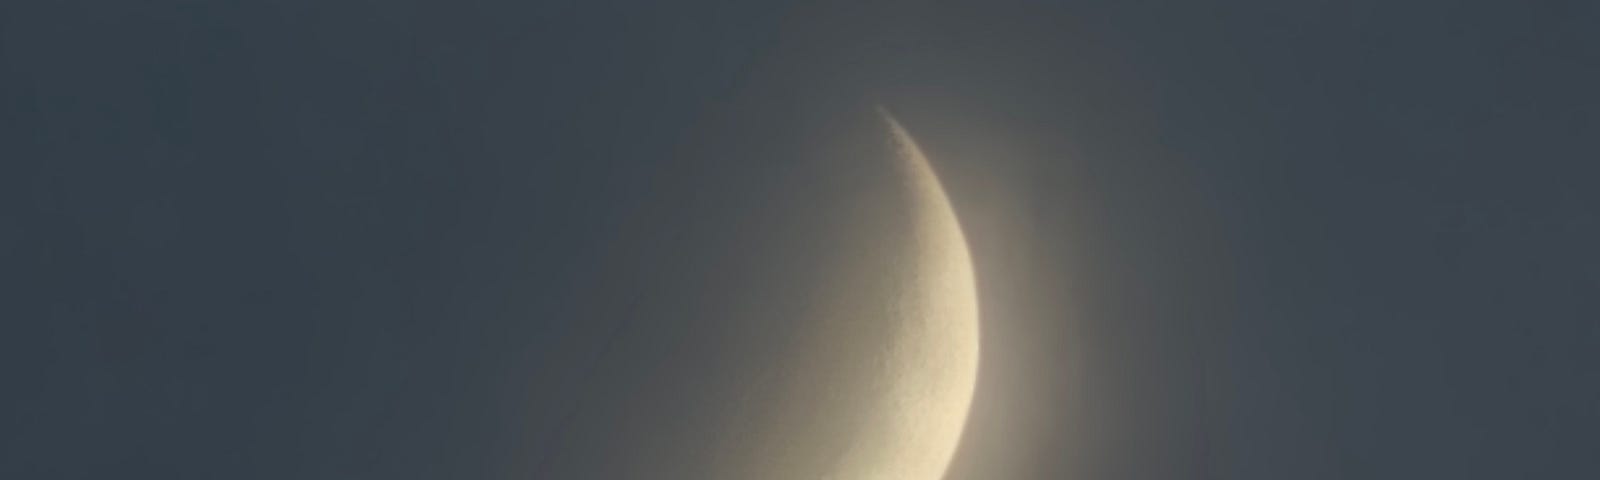 picture of a crescent moon